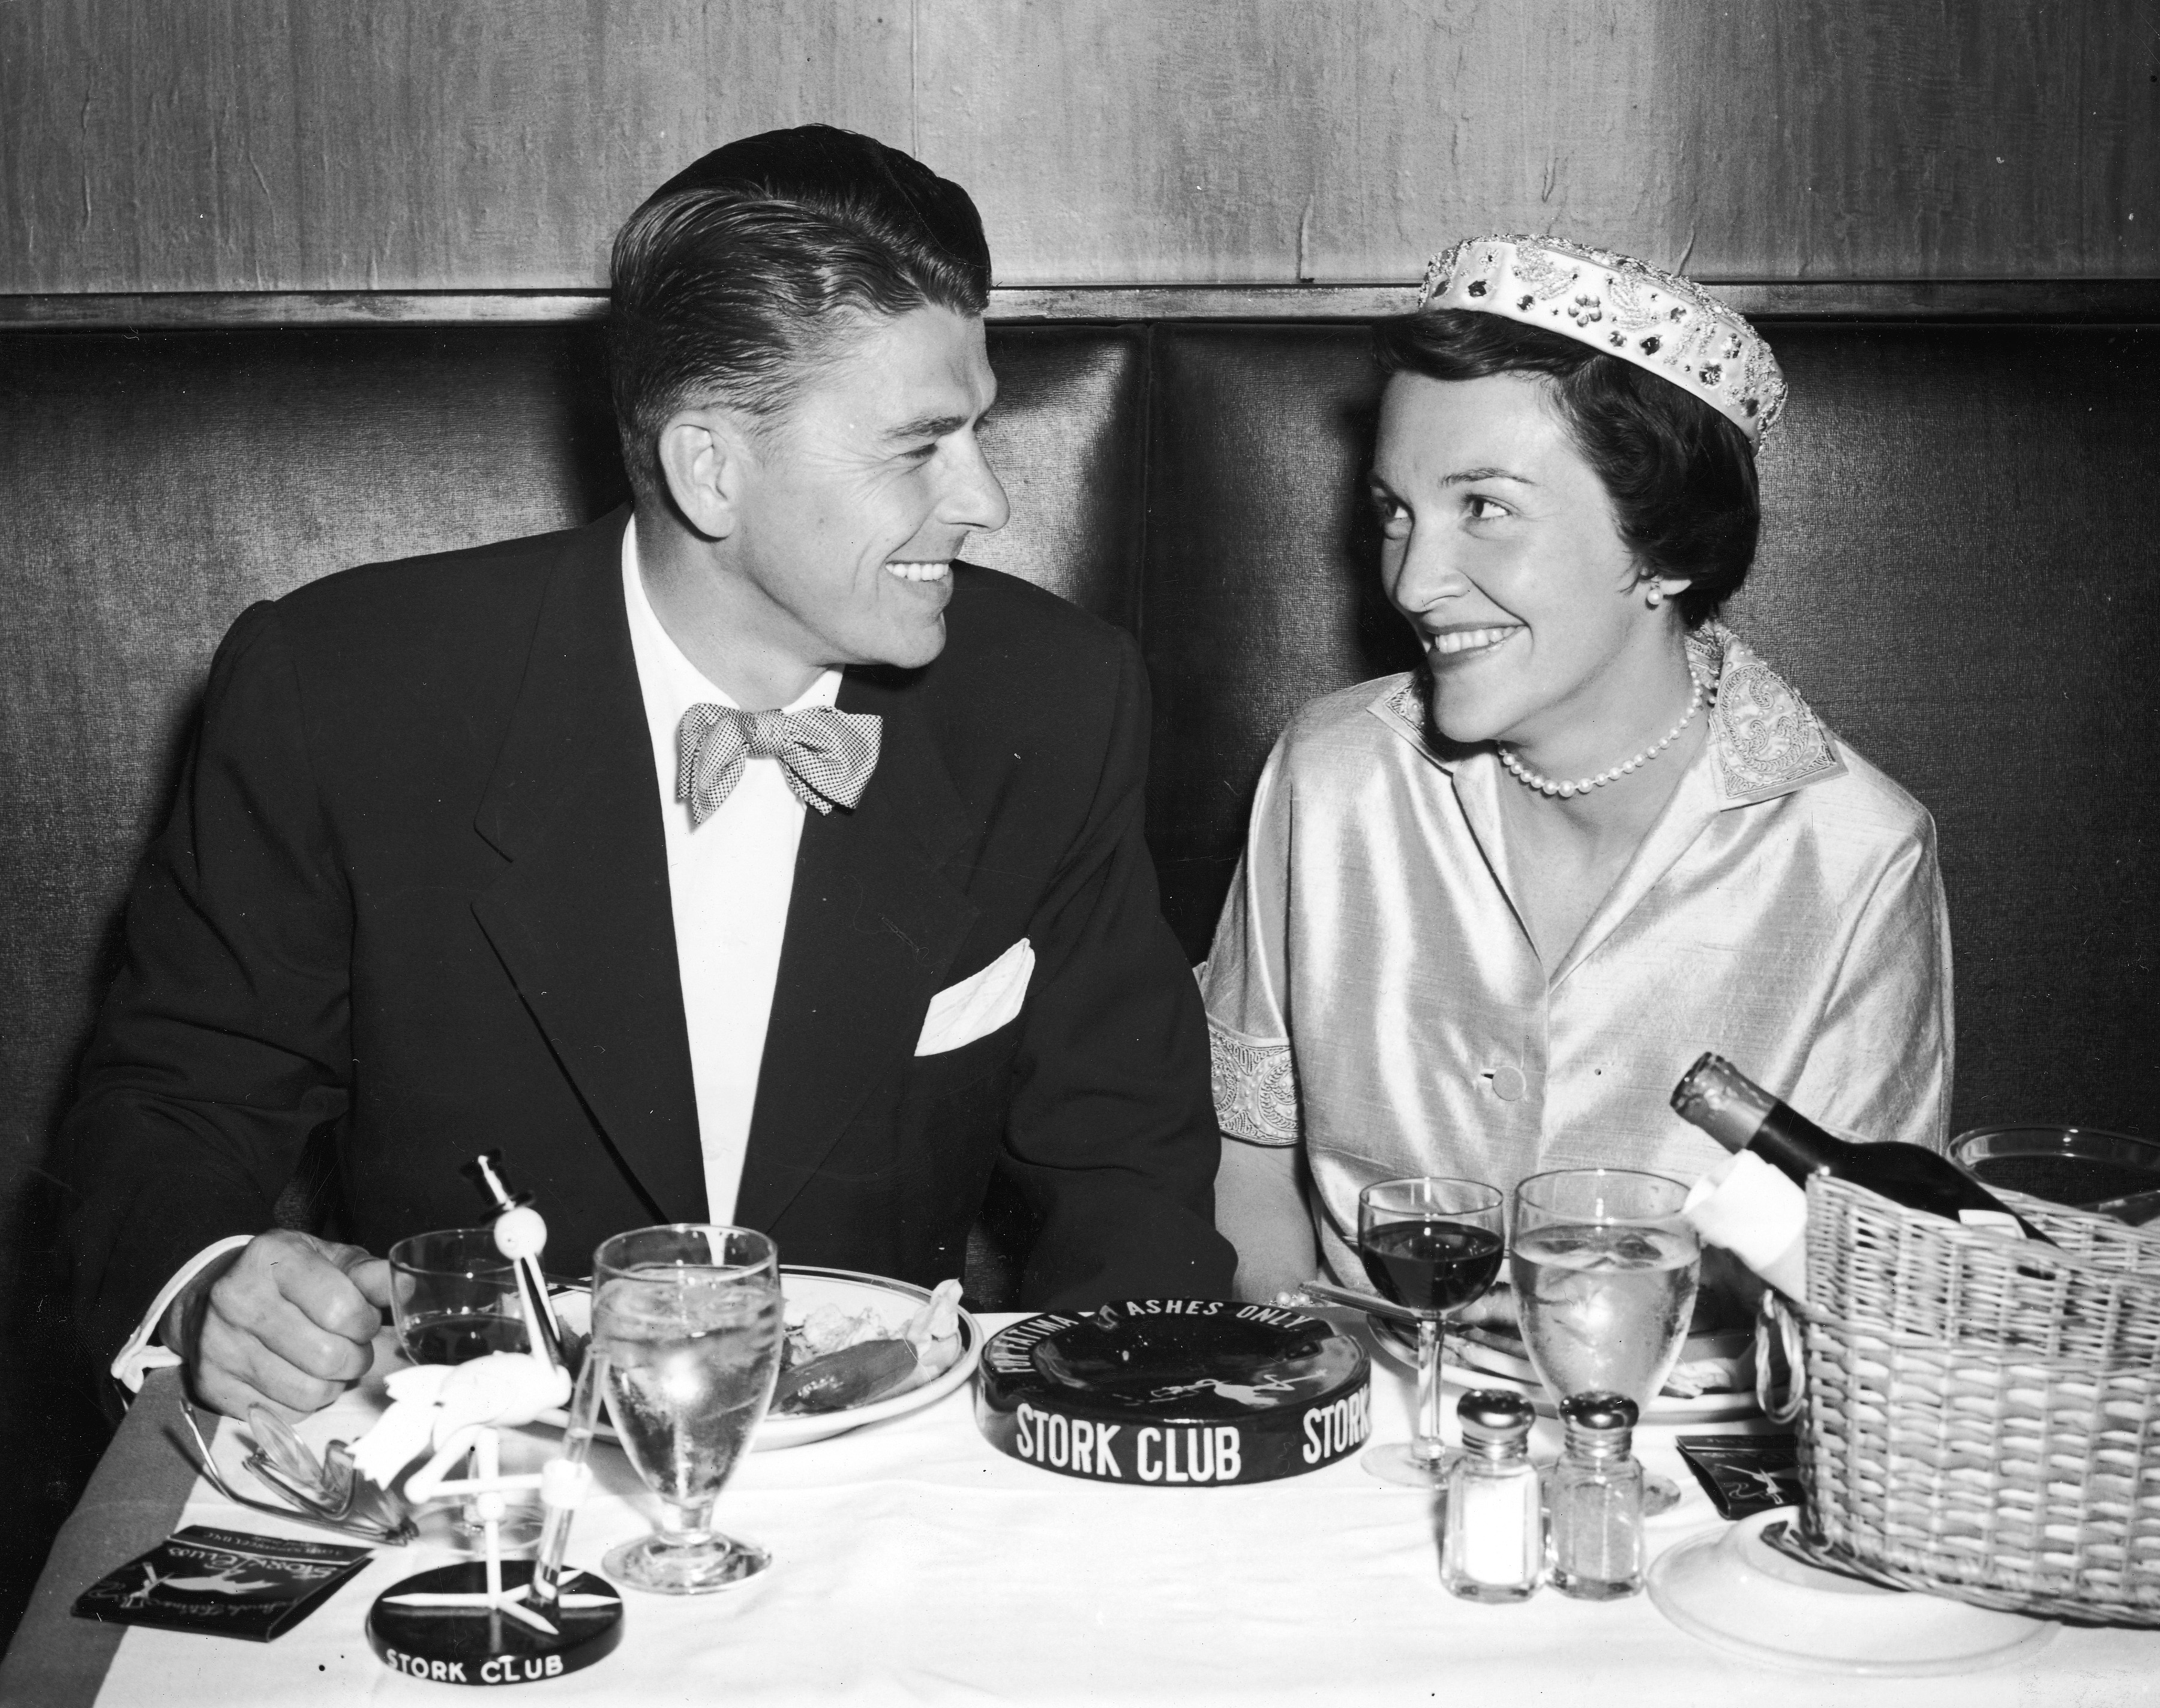 Ronald Reagan and his wife Nancy Reagan smile during their honeymoon dinner at the Stork Club in New York in 1952.